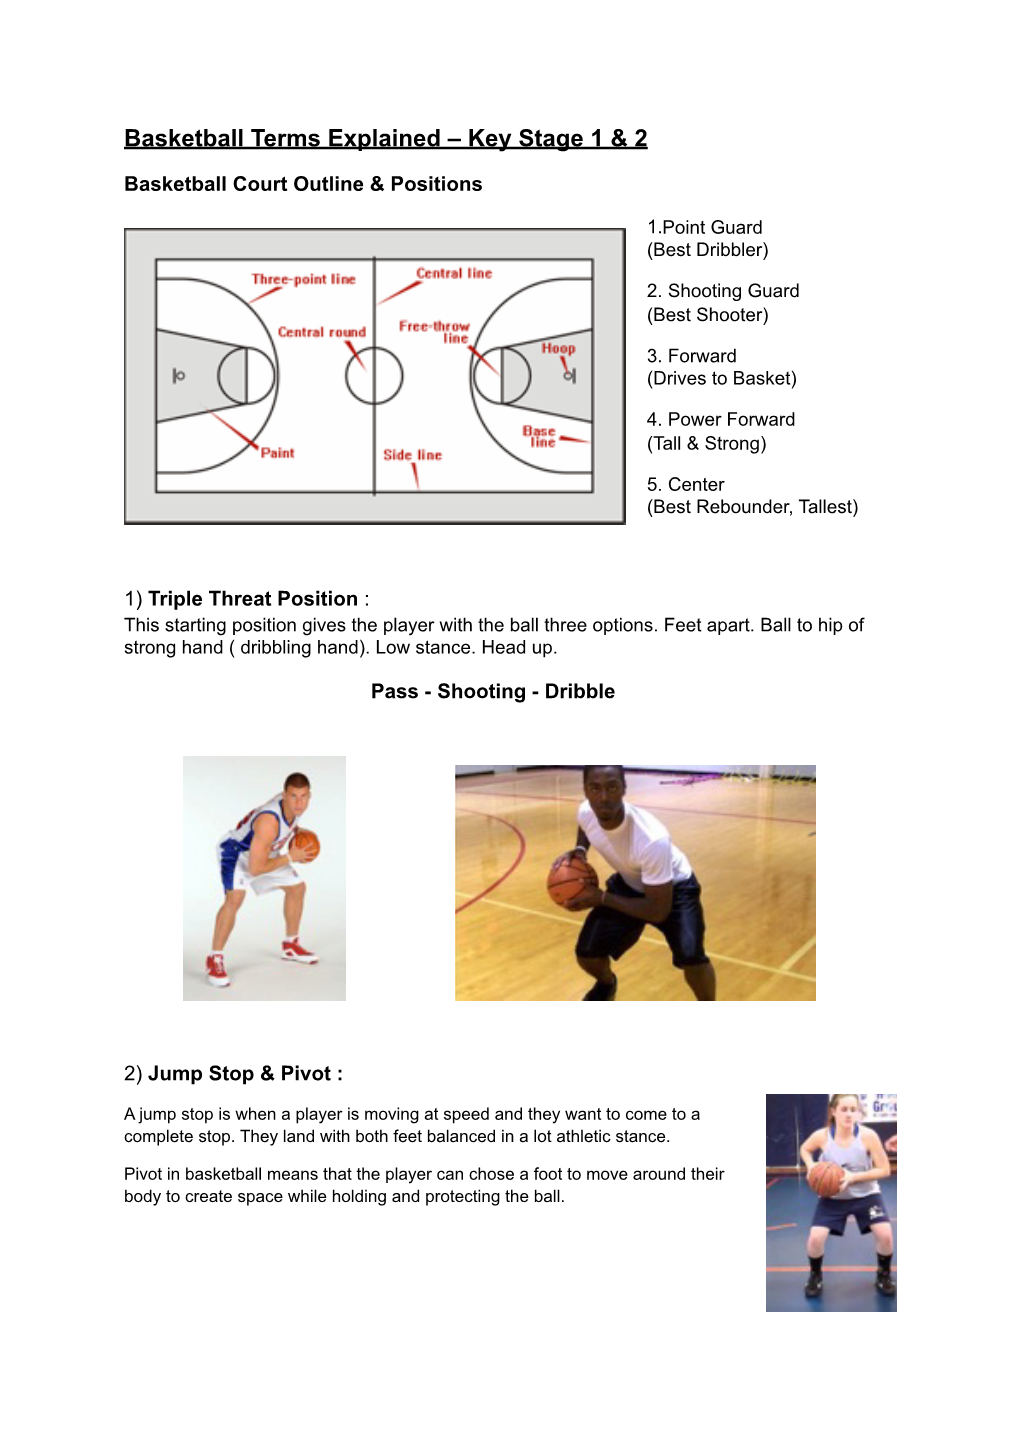 Basketball Terms Explained – Key Stage 1 & 2